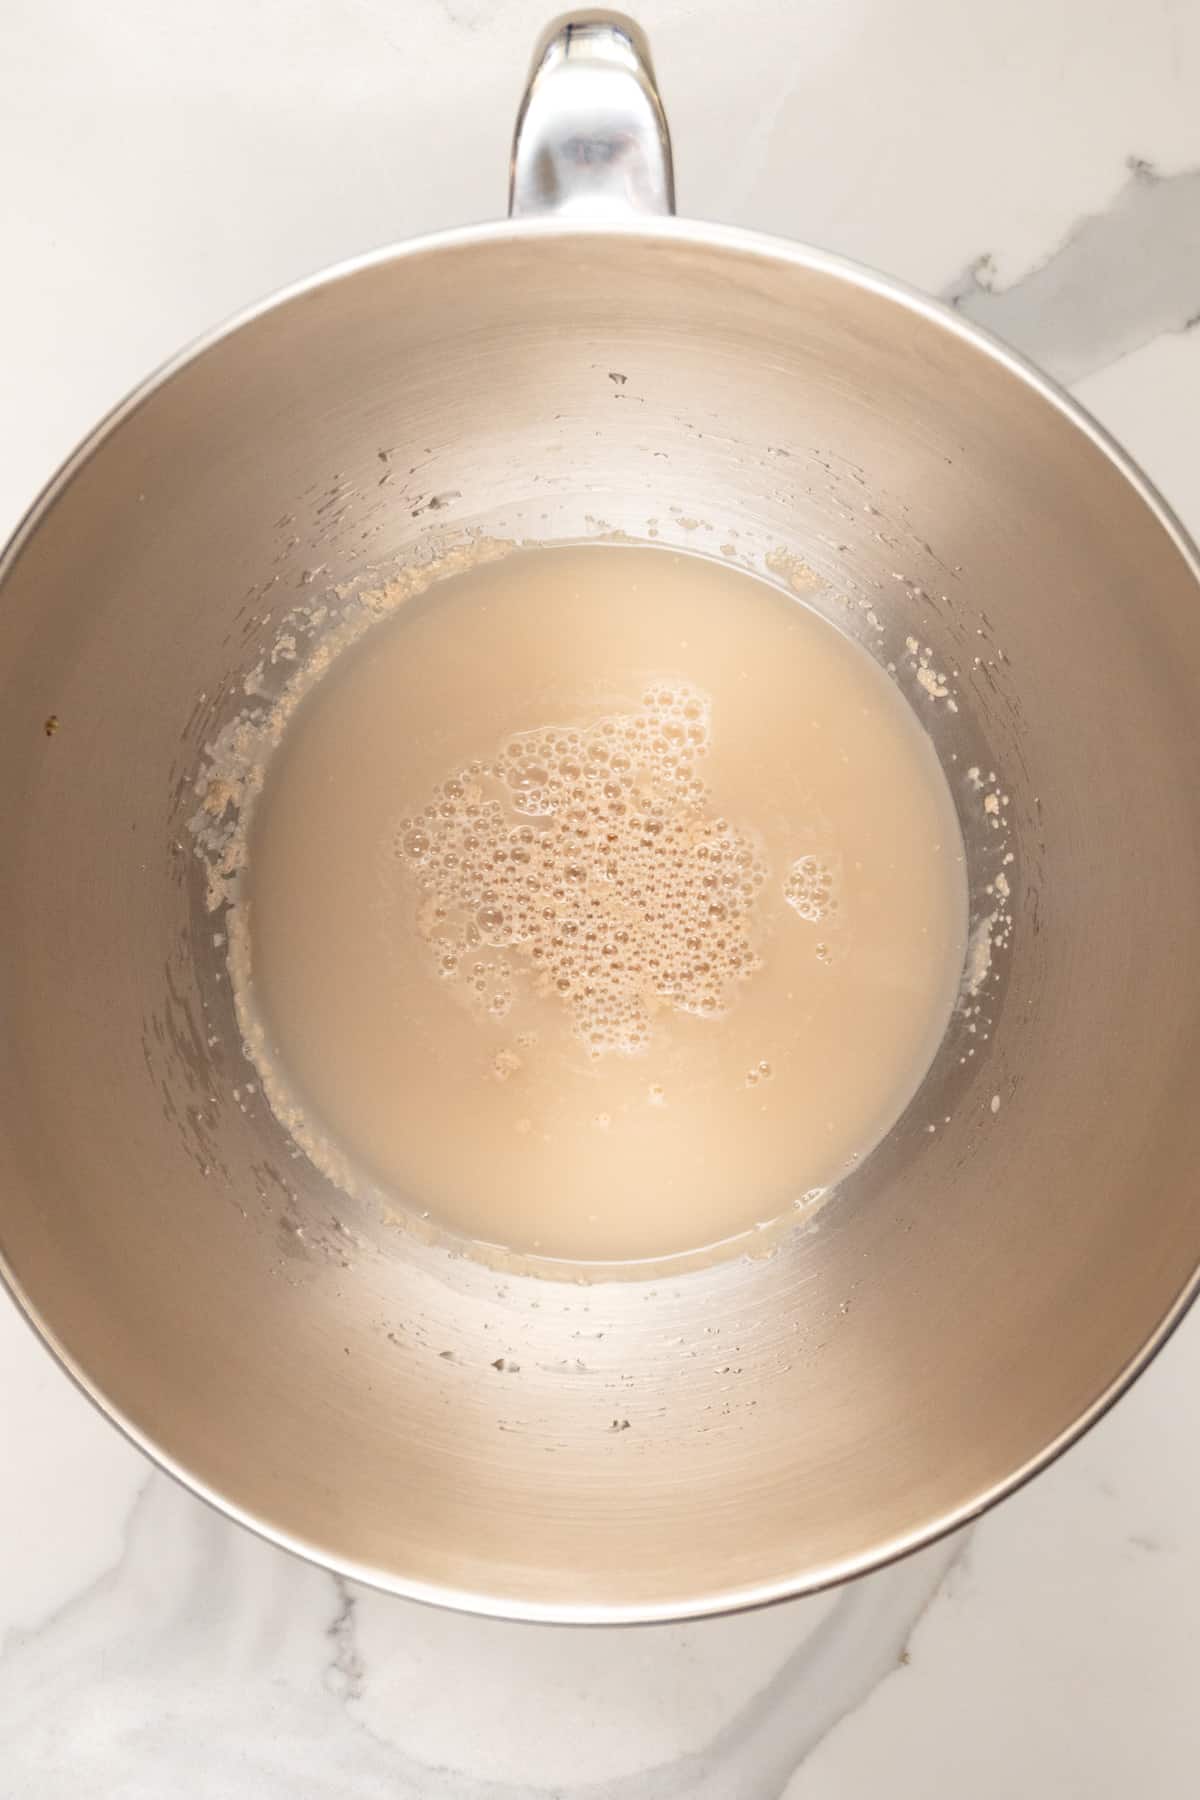 murky water with yeast bubbles in a silver bowl